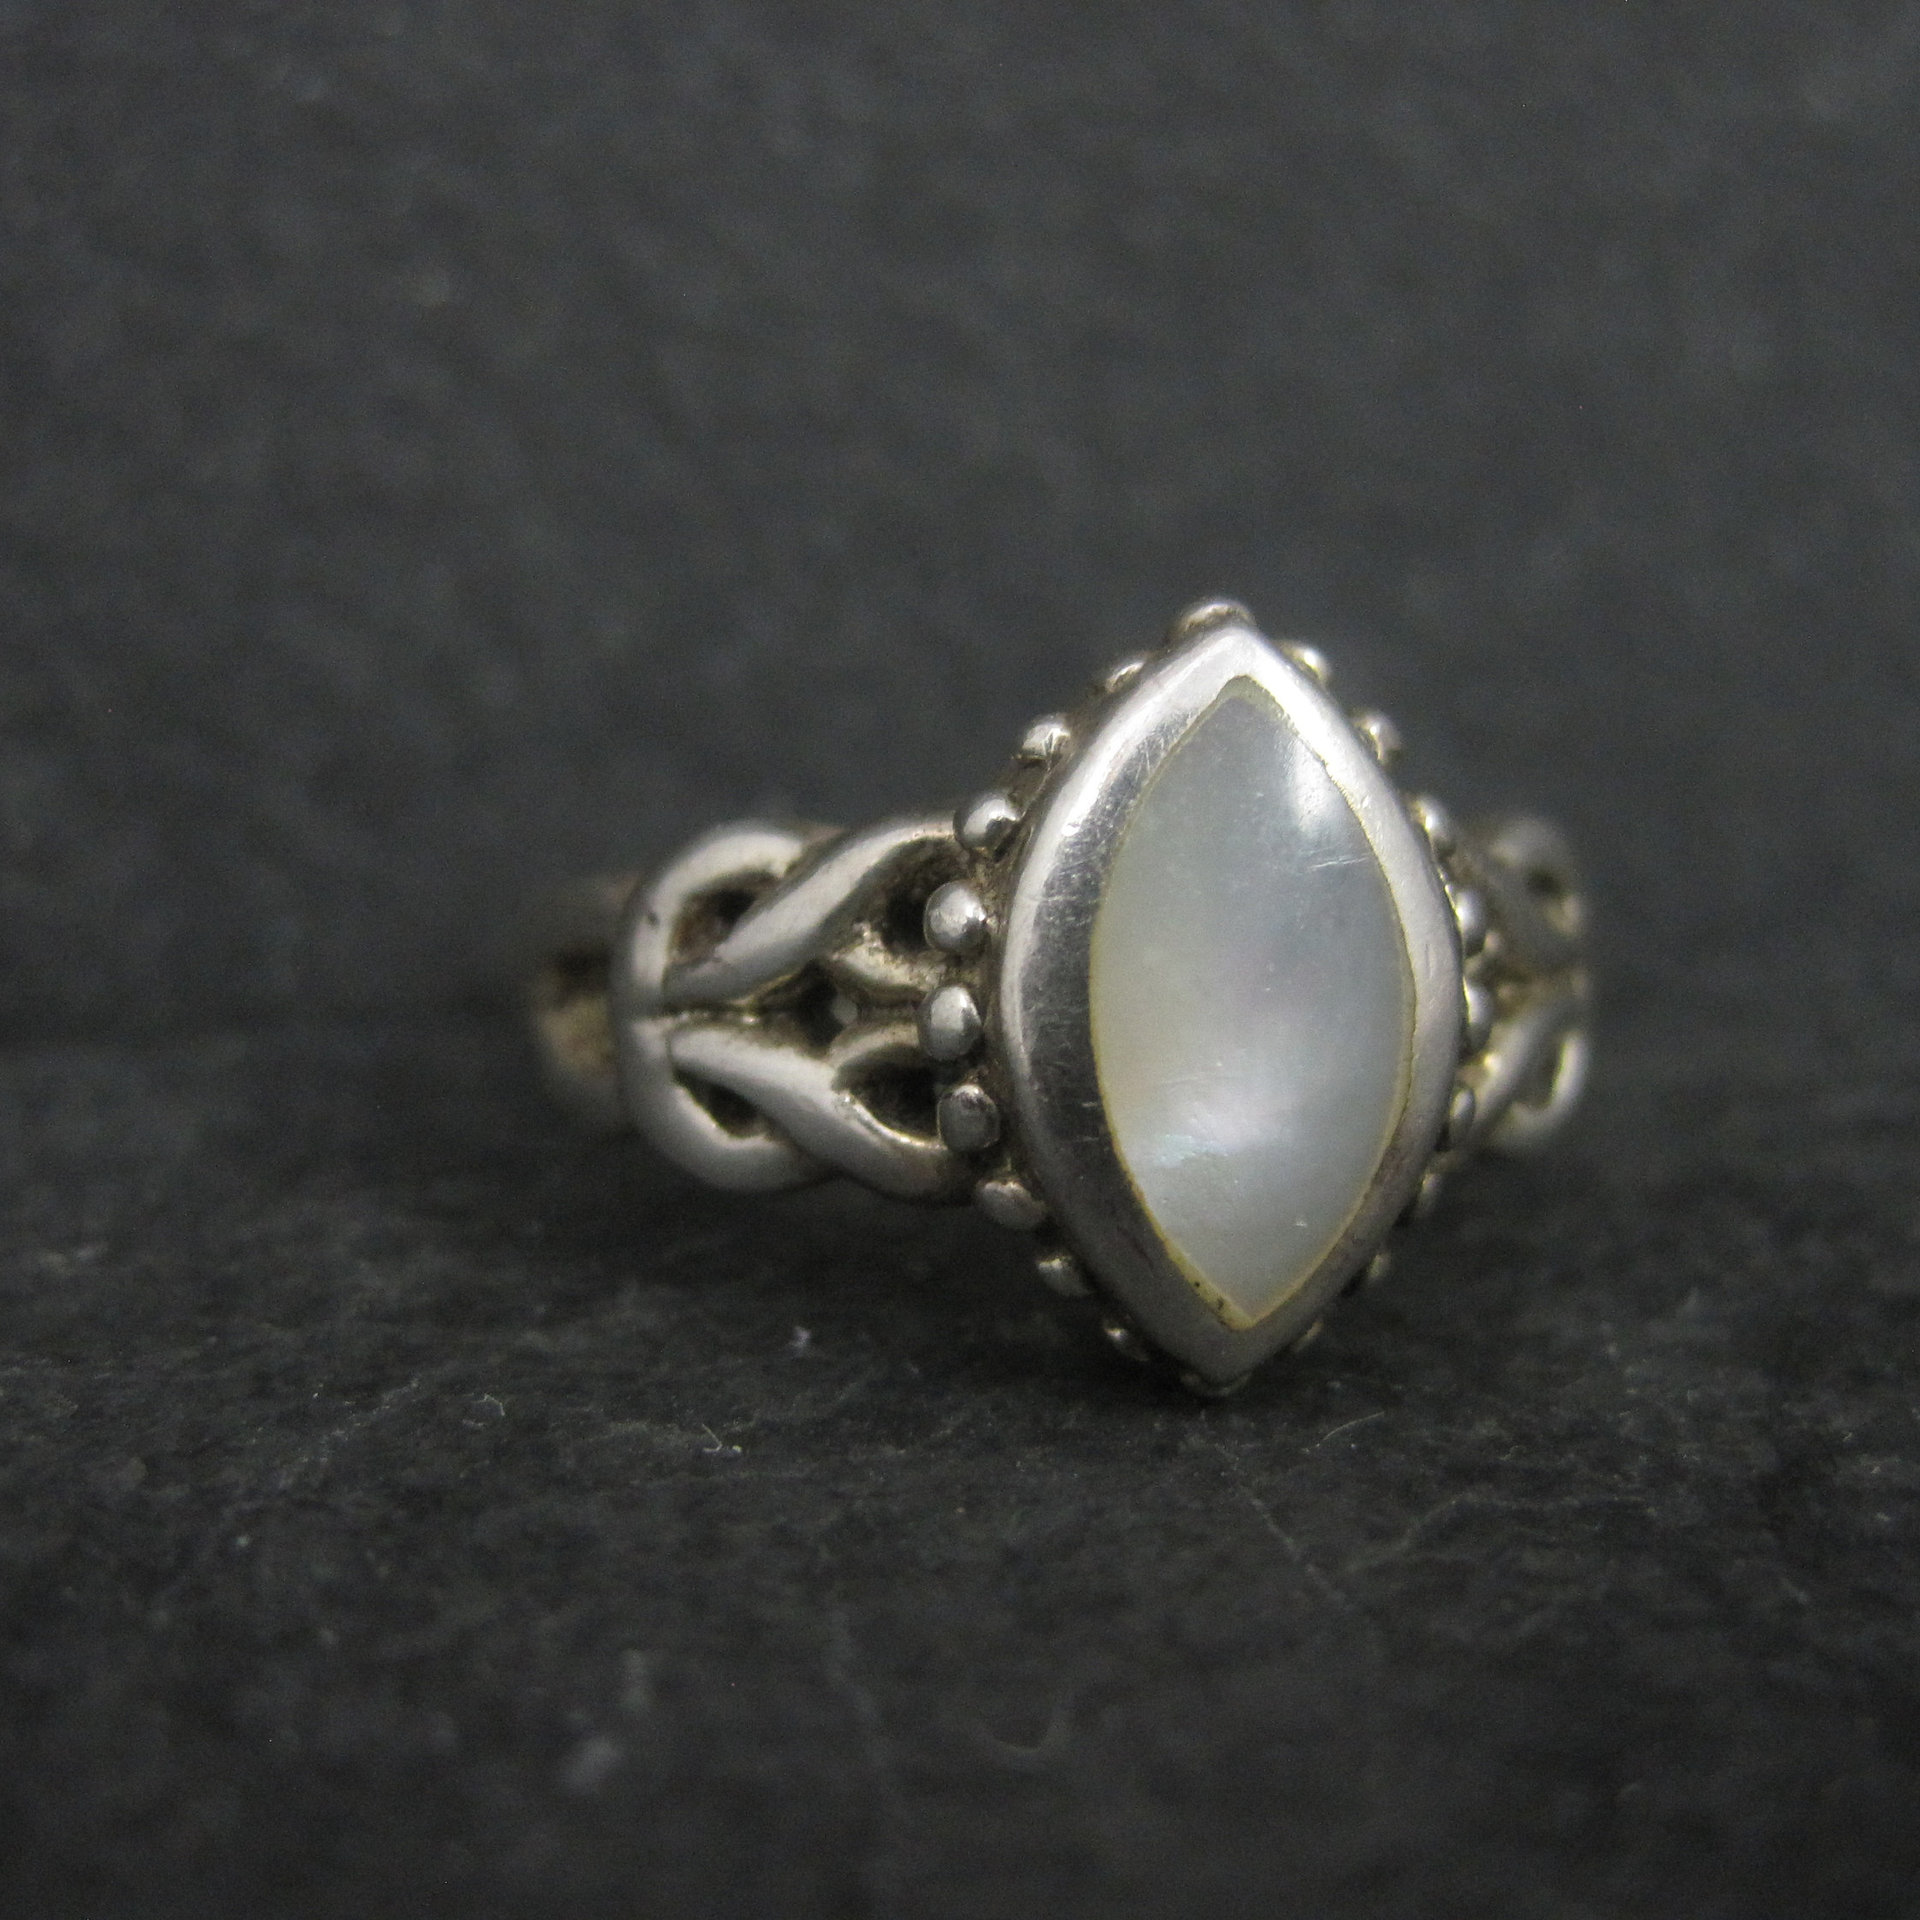 Vintage Sterling Mother of Pearl Ring Size 9